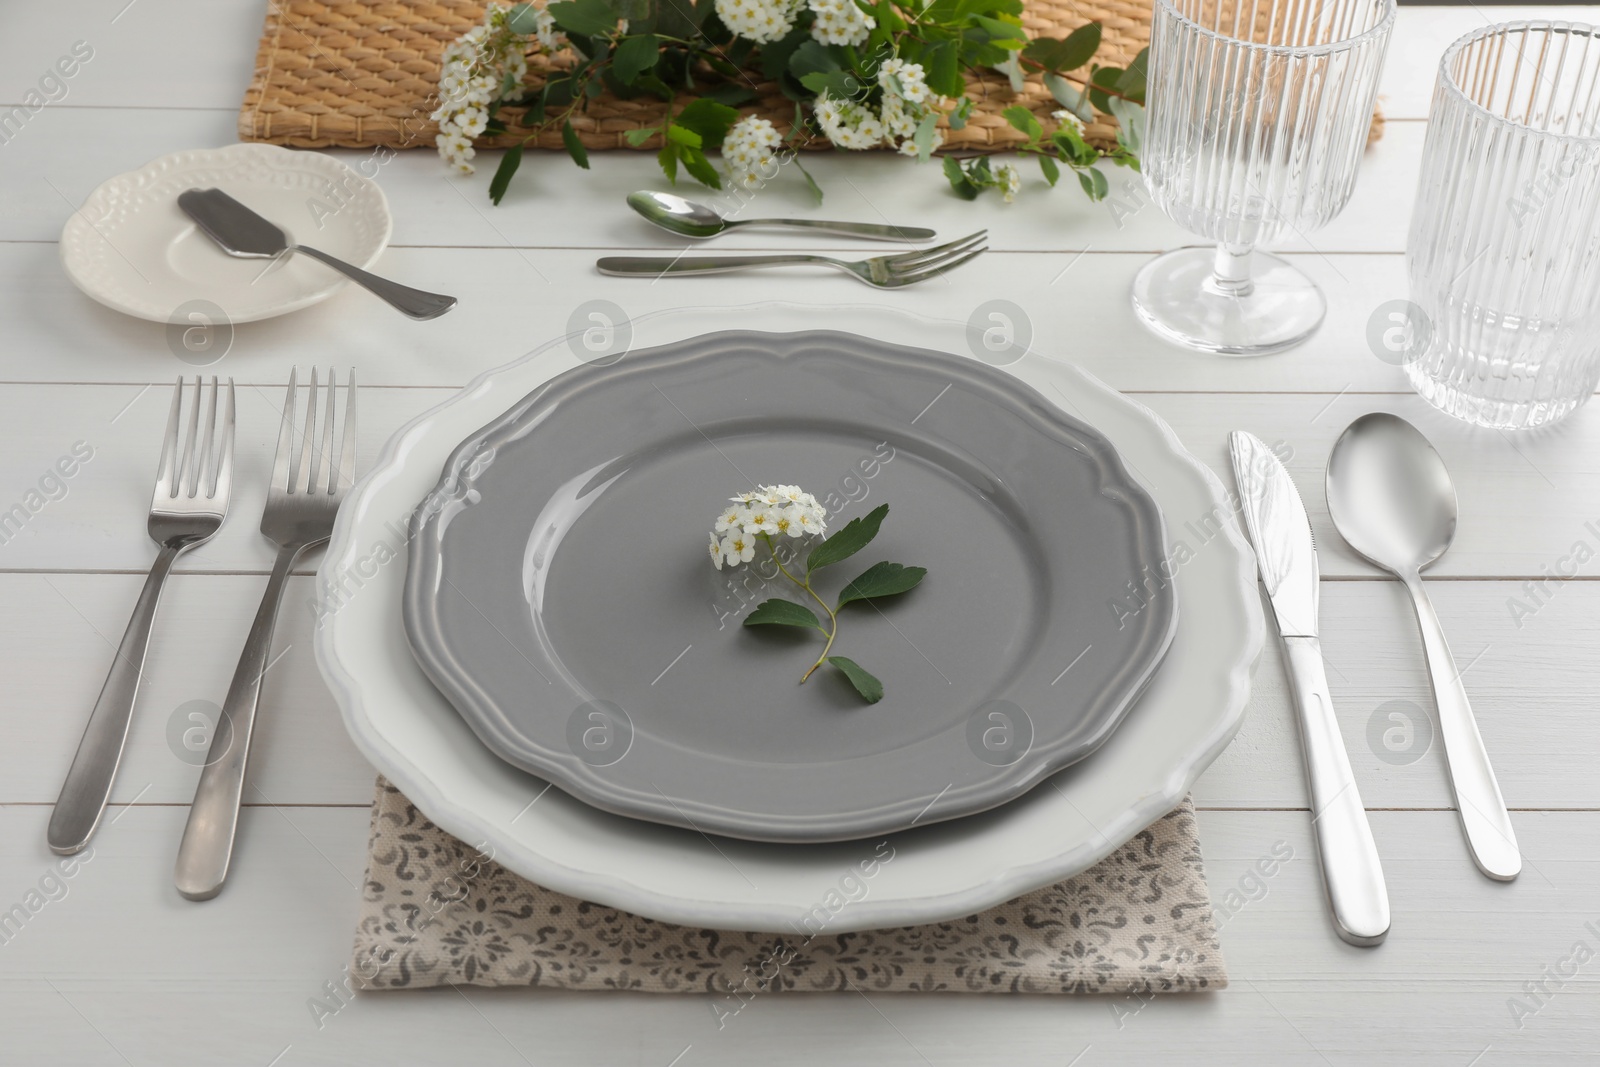 Photo of Stylish setting with cutlery, glasses and plates on white wooden table